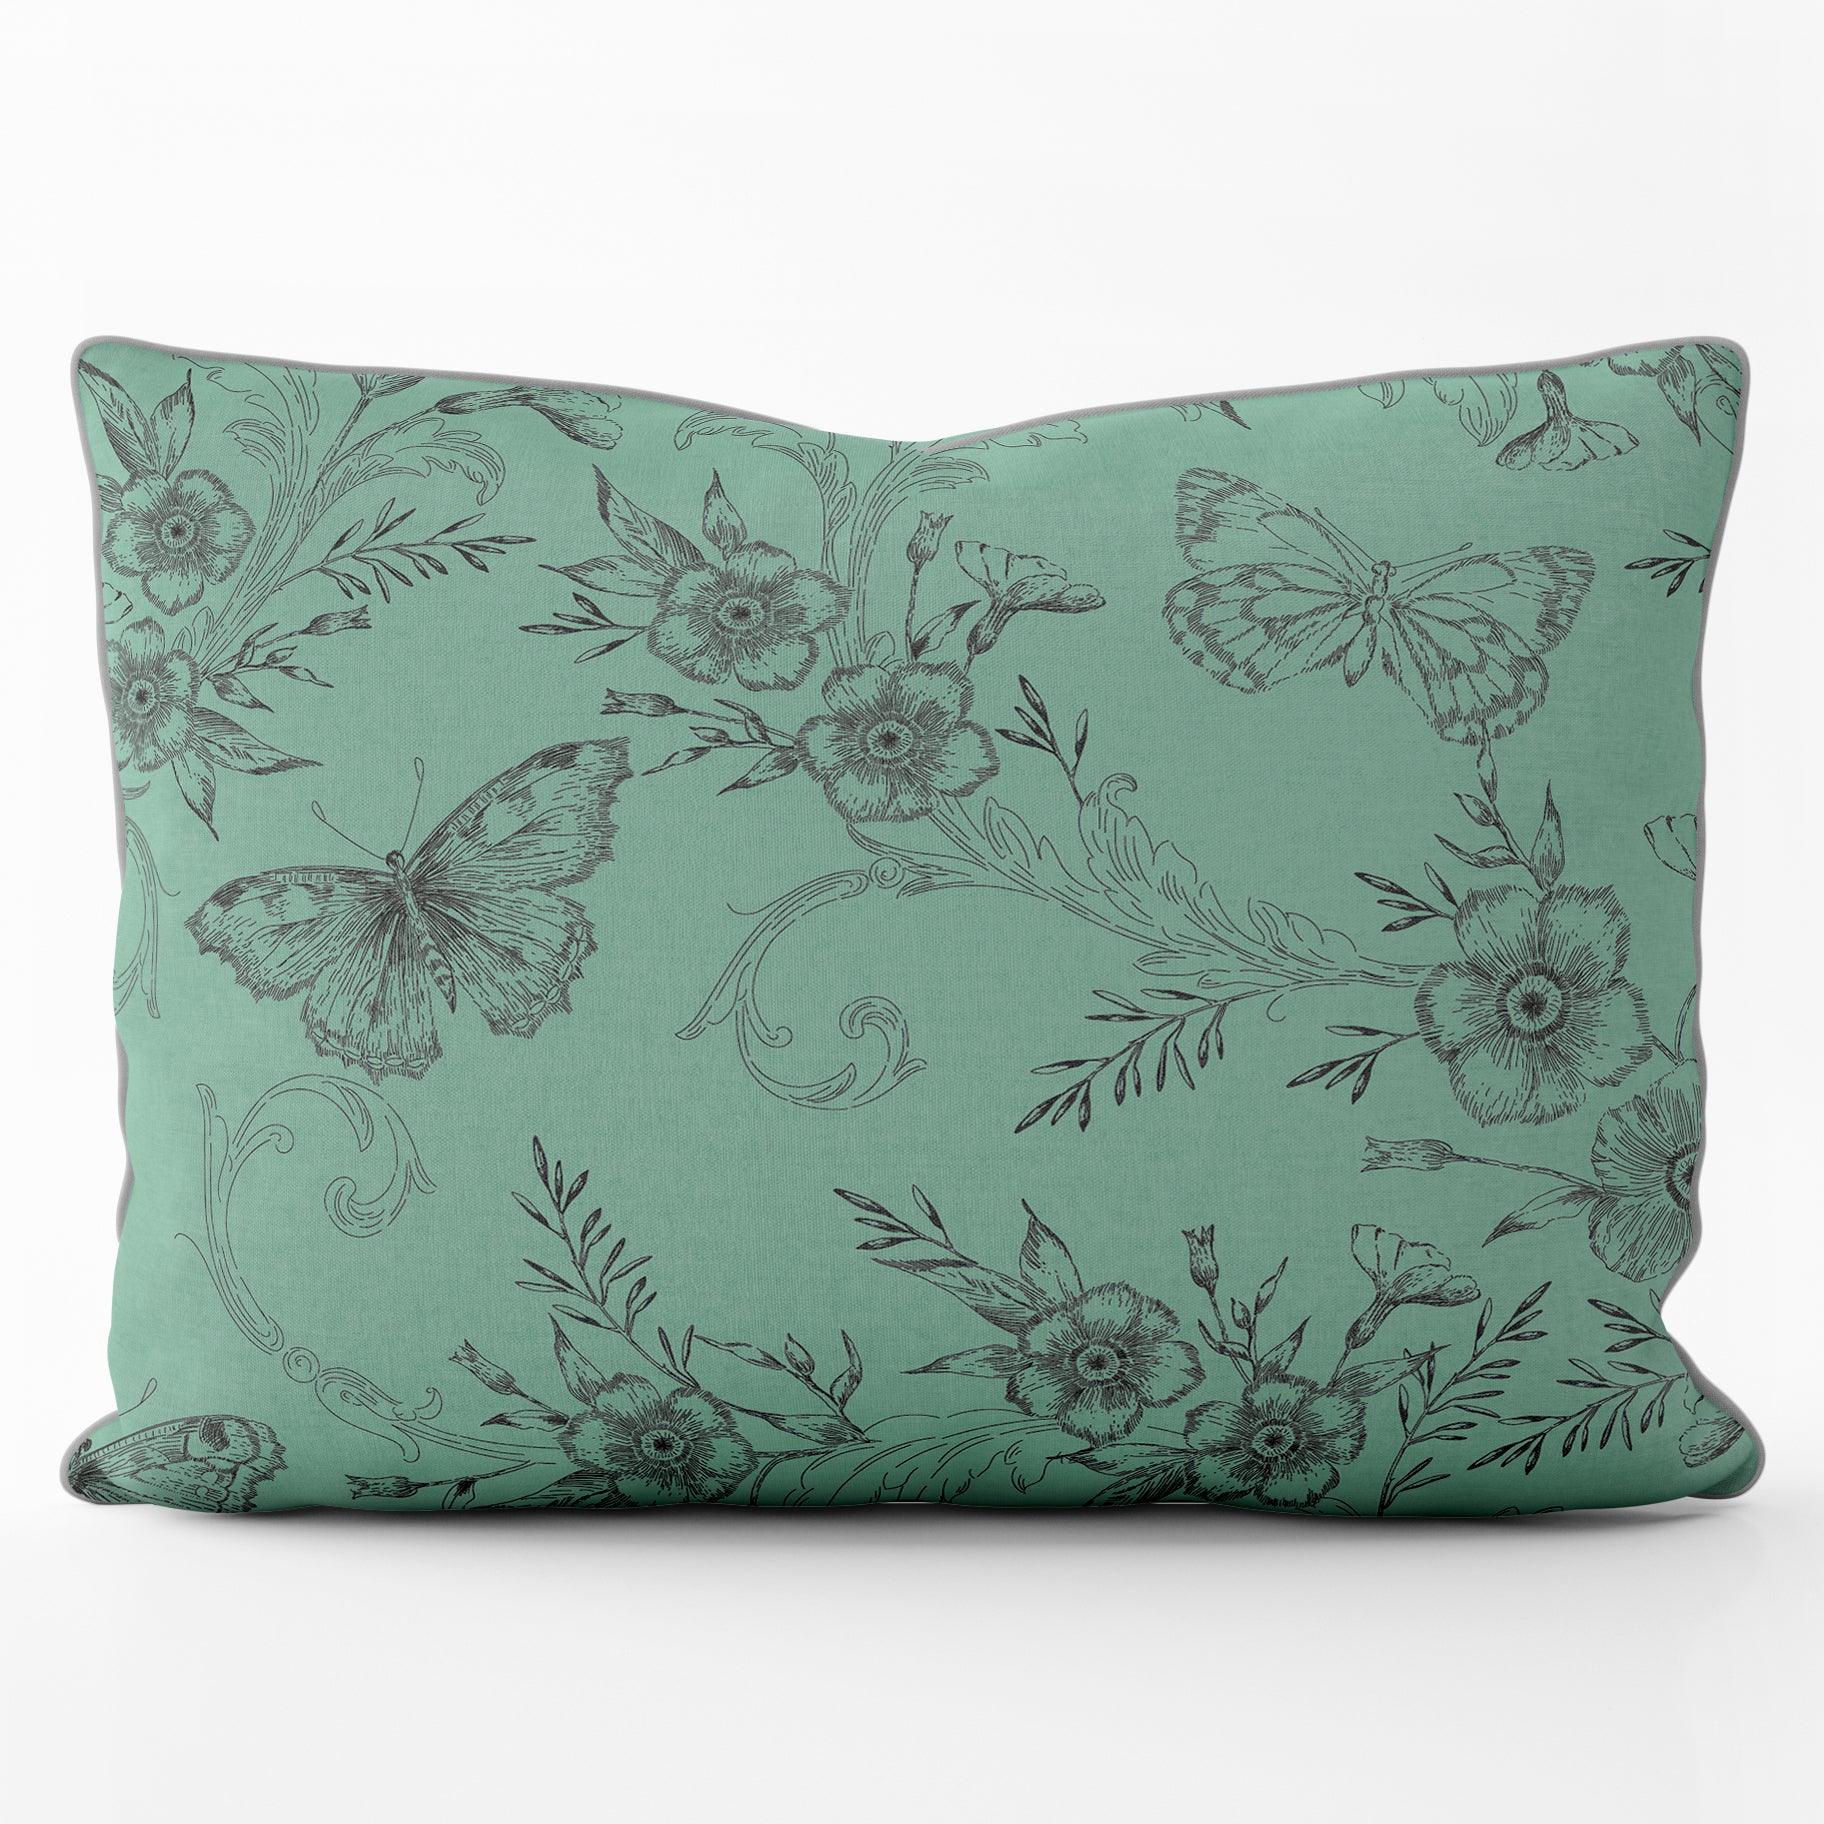 Trailing Butterfly Mint Green Landscape - House Of Turnowsky Cushion